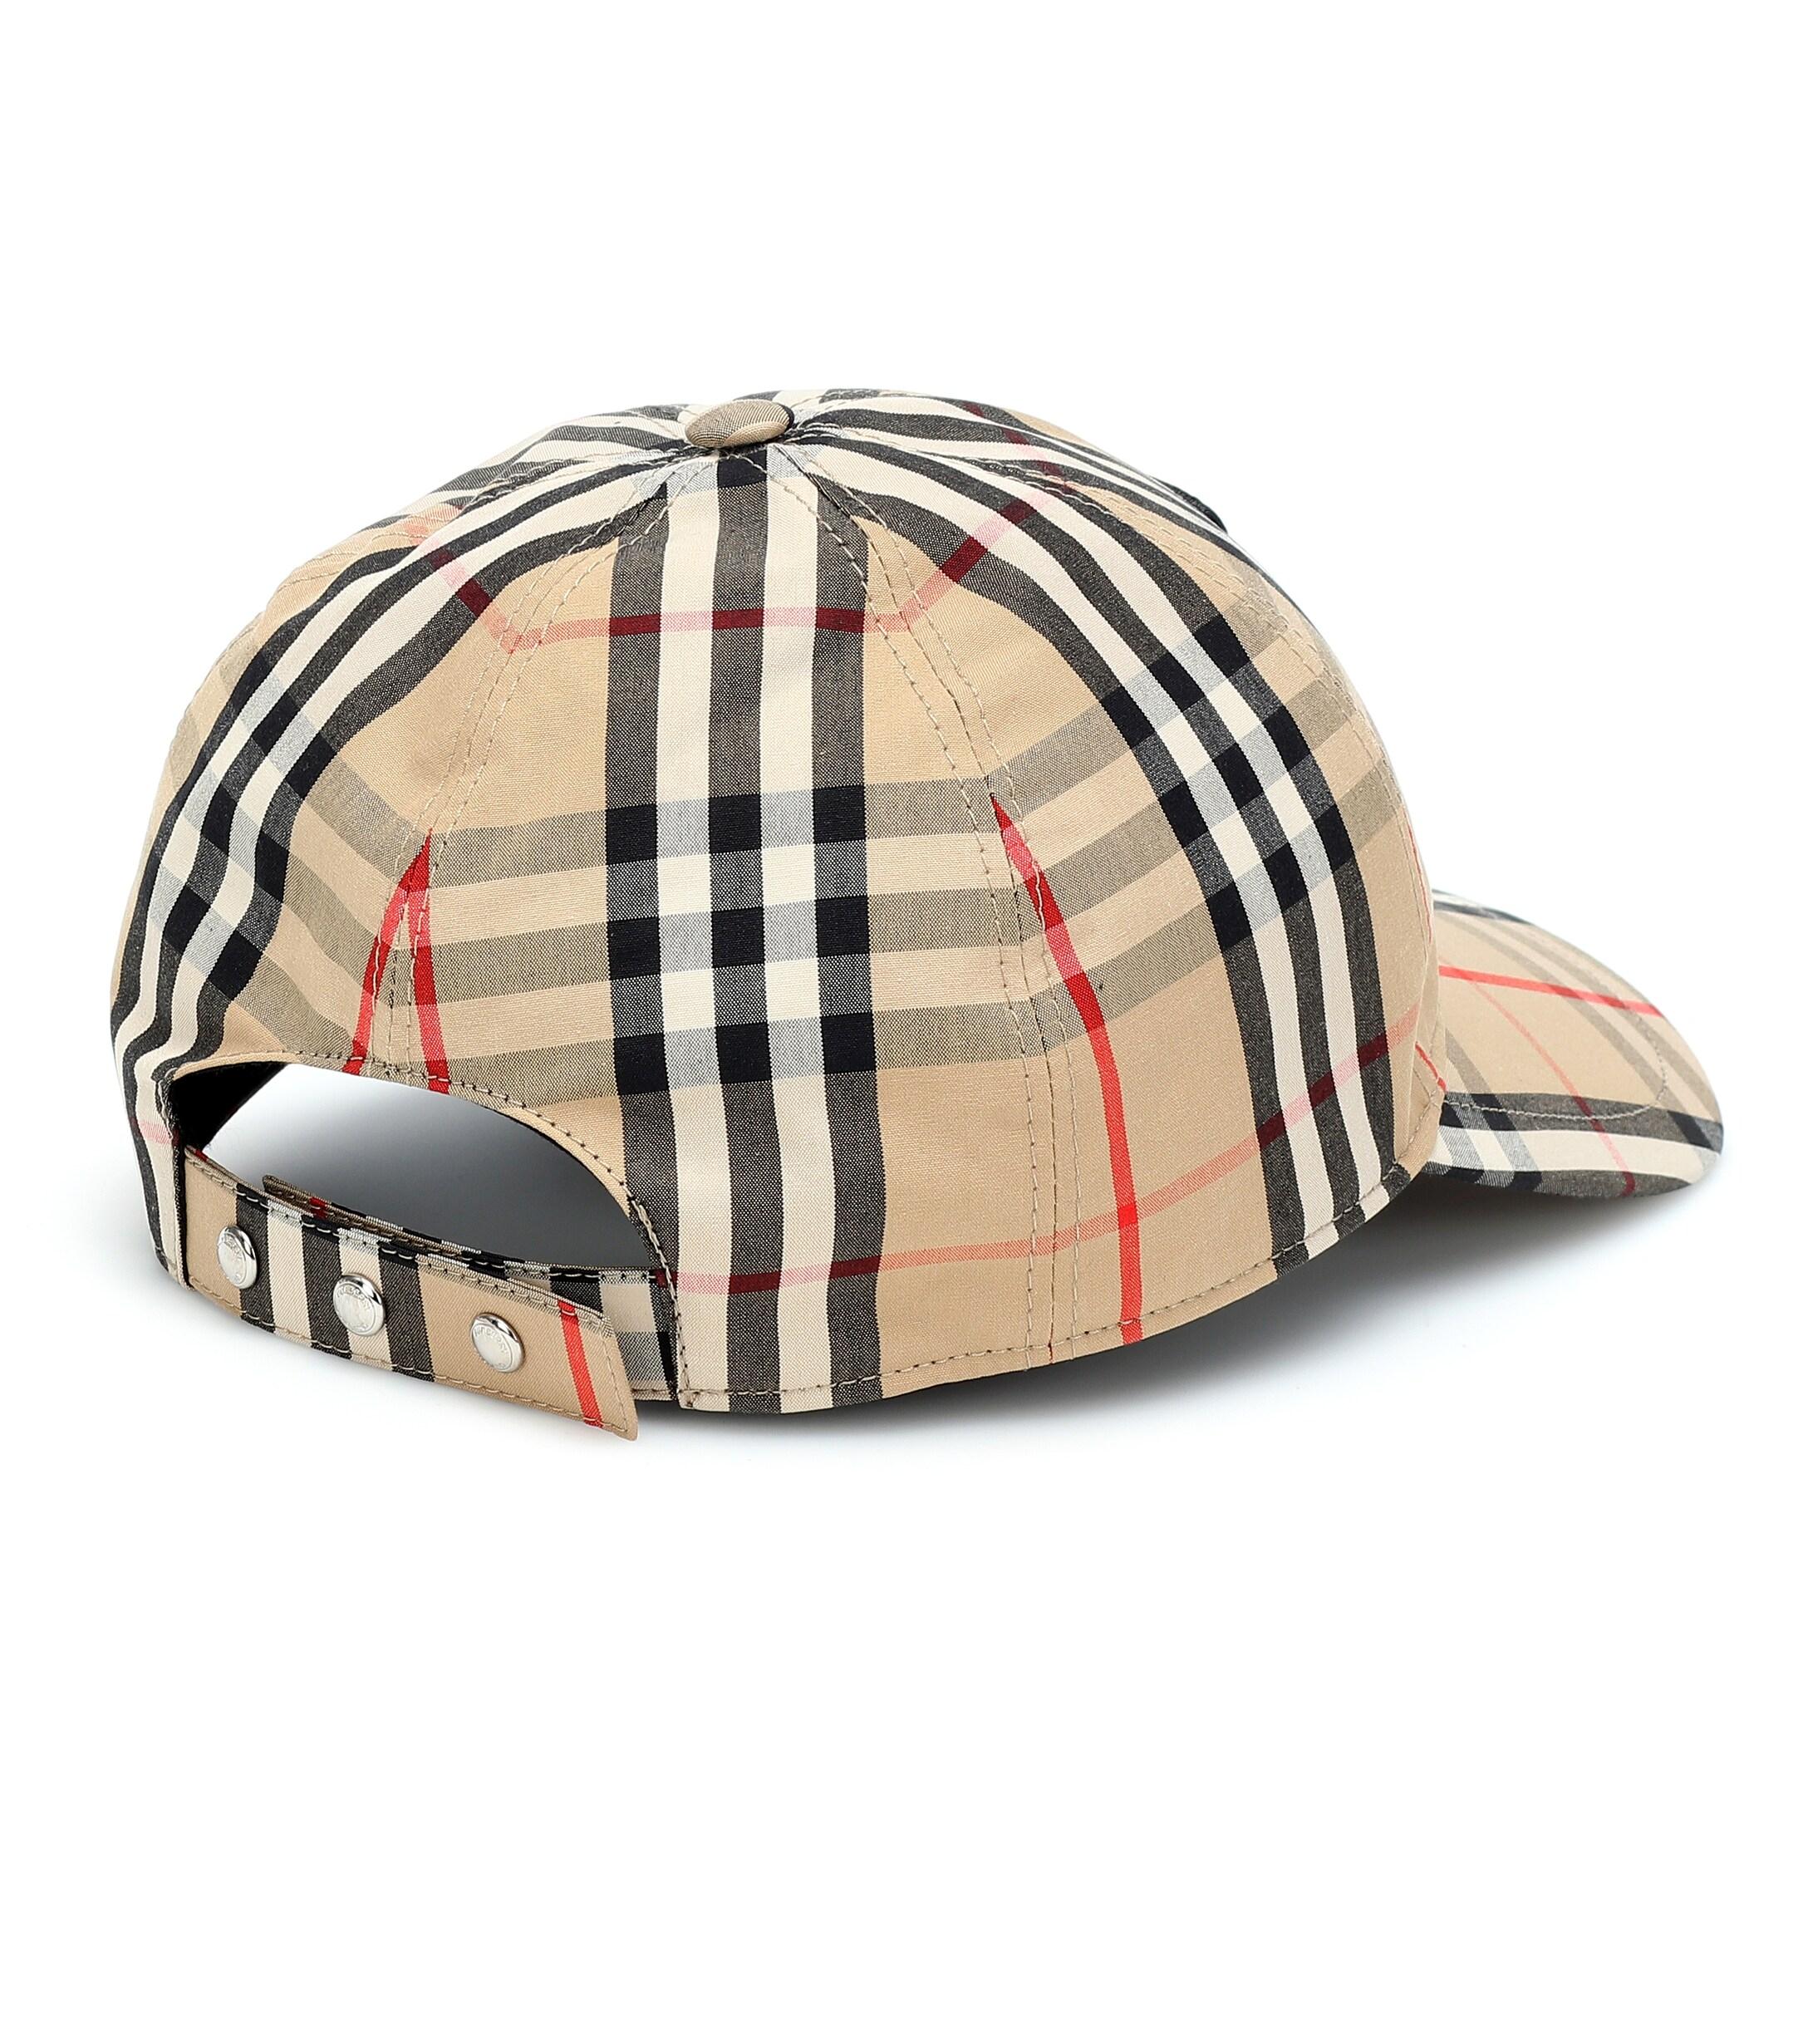 Burberry Tb Vintage Check Cotton Baseball Cap in Beige (Natural) - Lyst